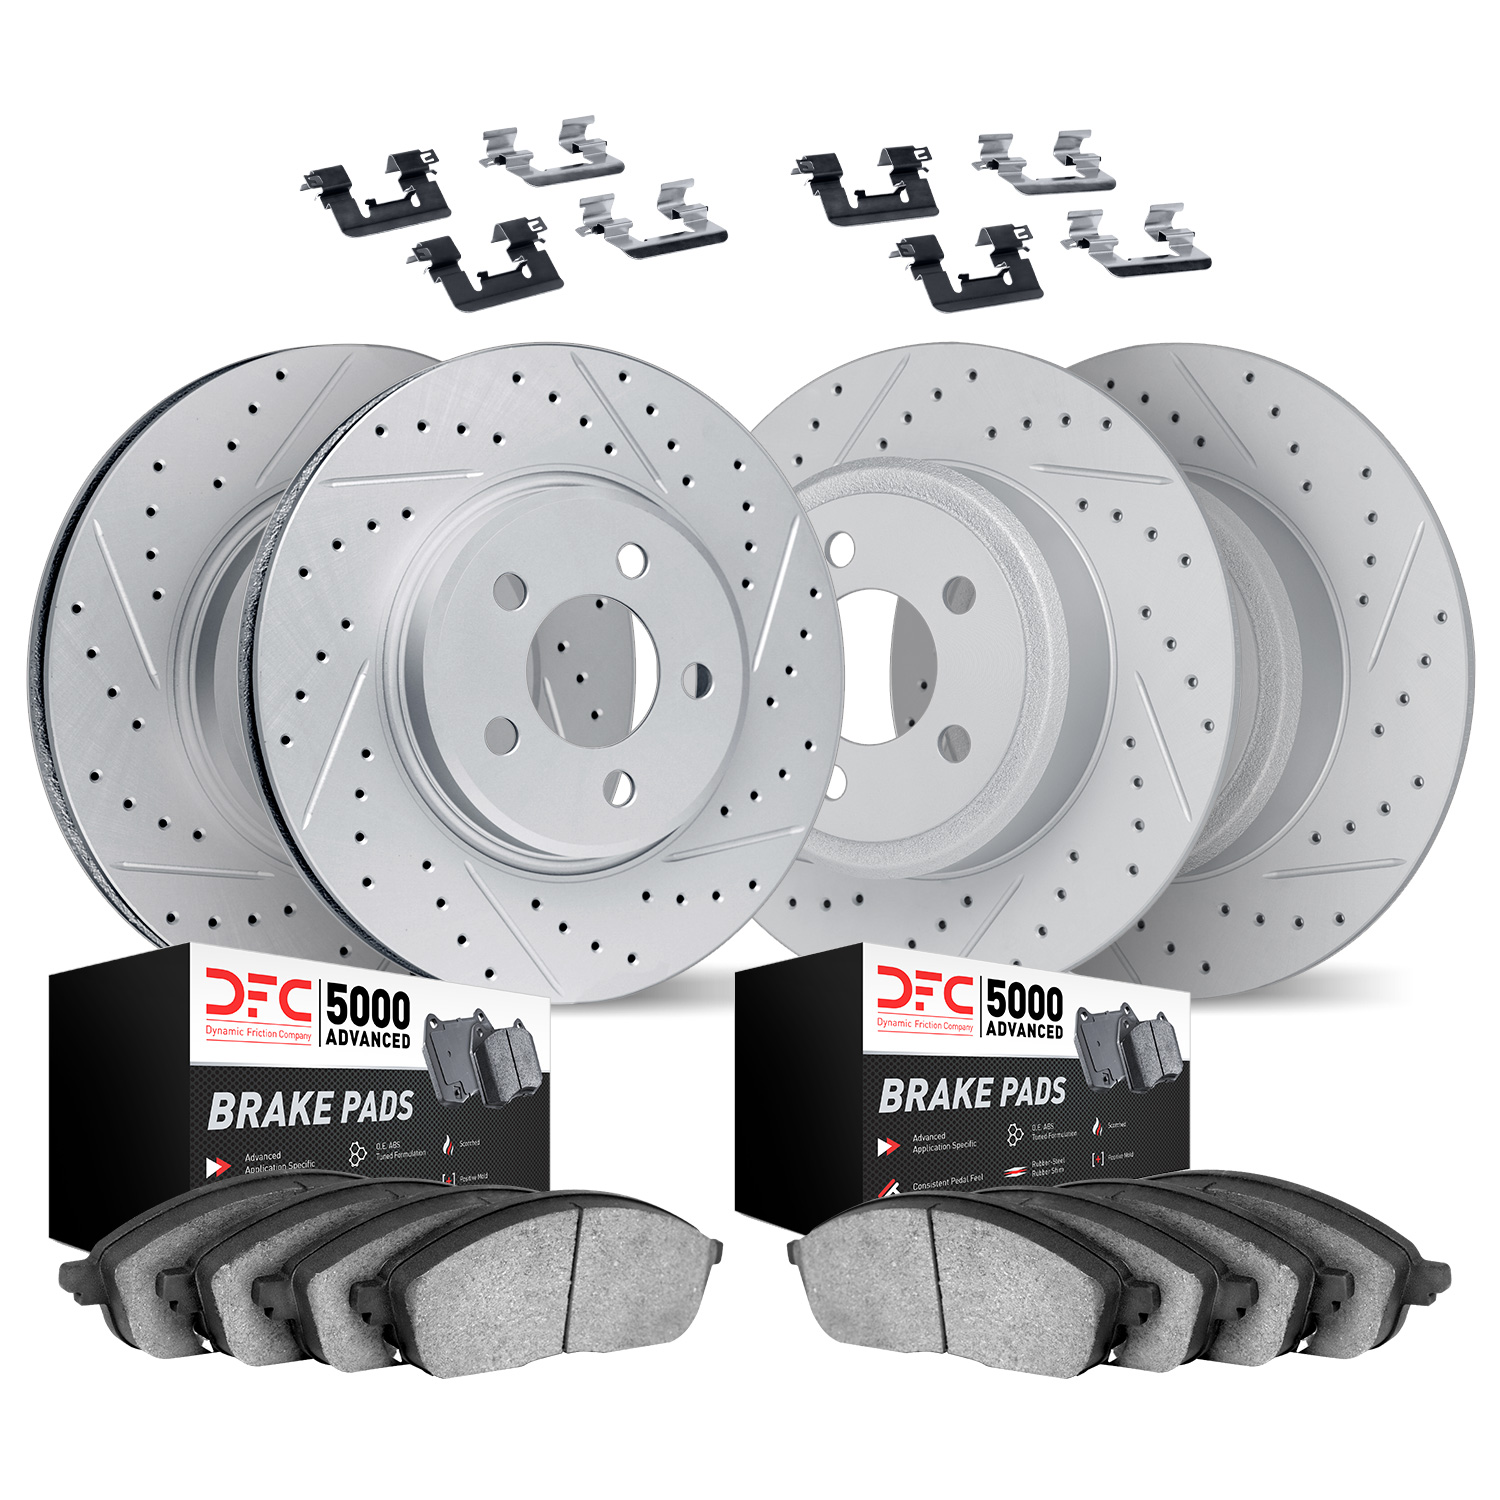 2514-45015 Geoperformance Drilled/Slotted Rotors w/5000 Advanced Brake Pads Kit & Hardware, 2011-2016 GM, Position: Front and Re